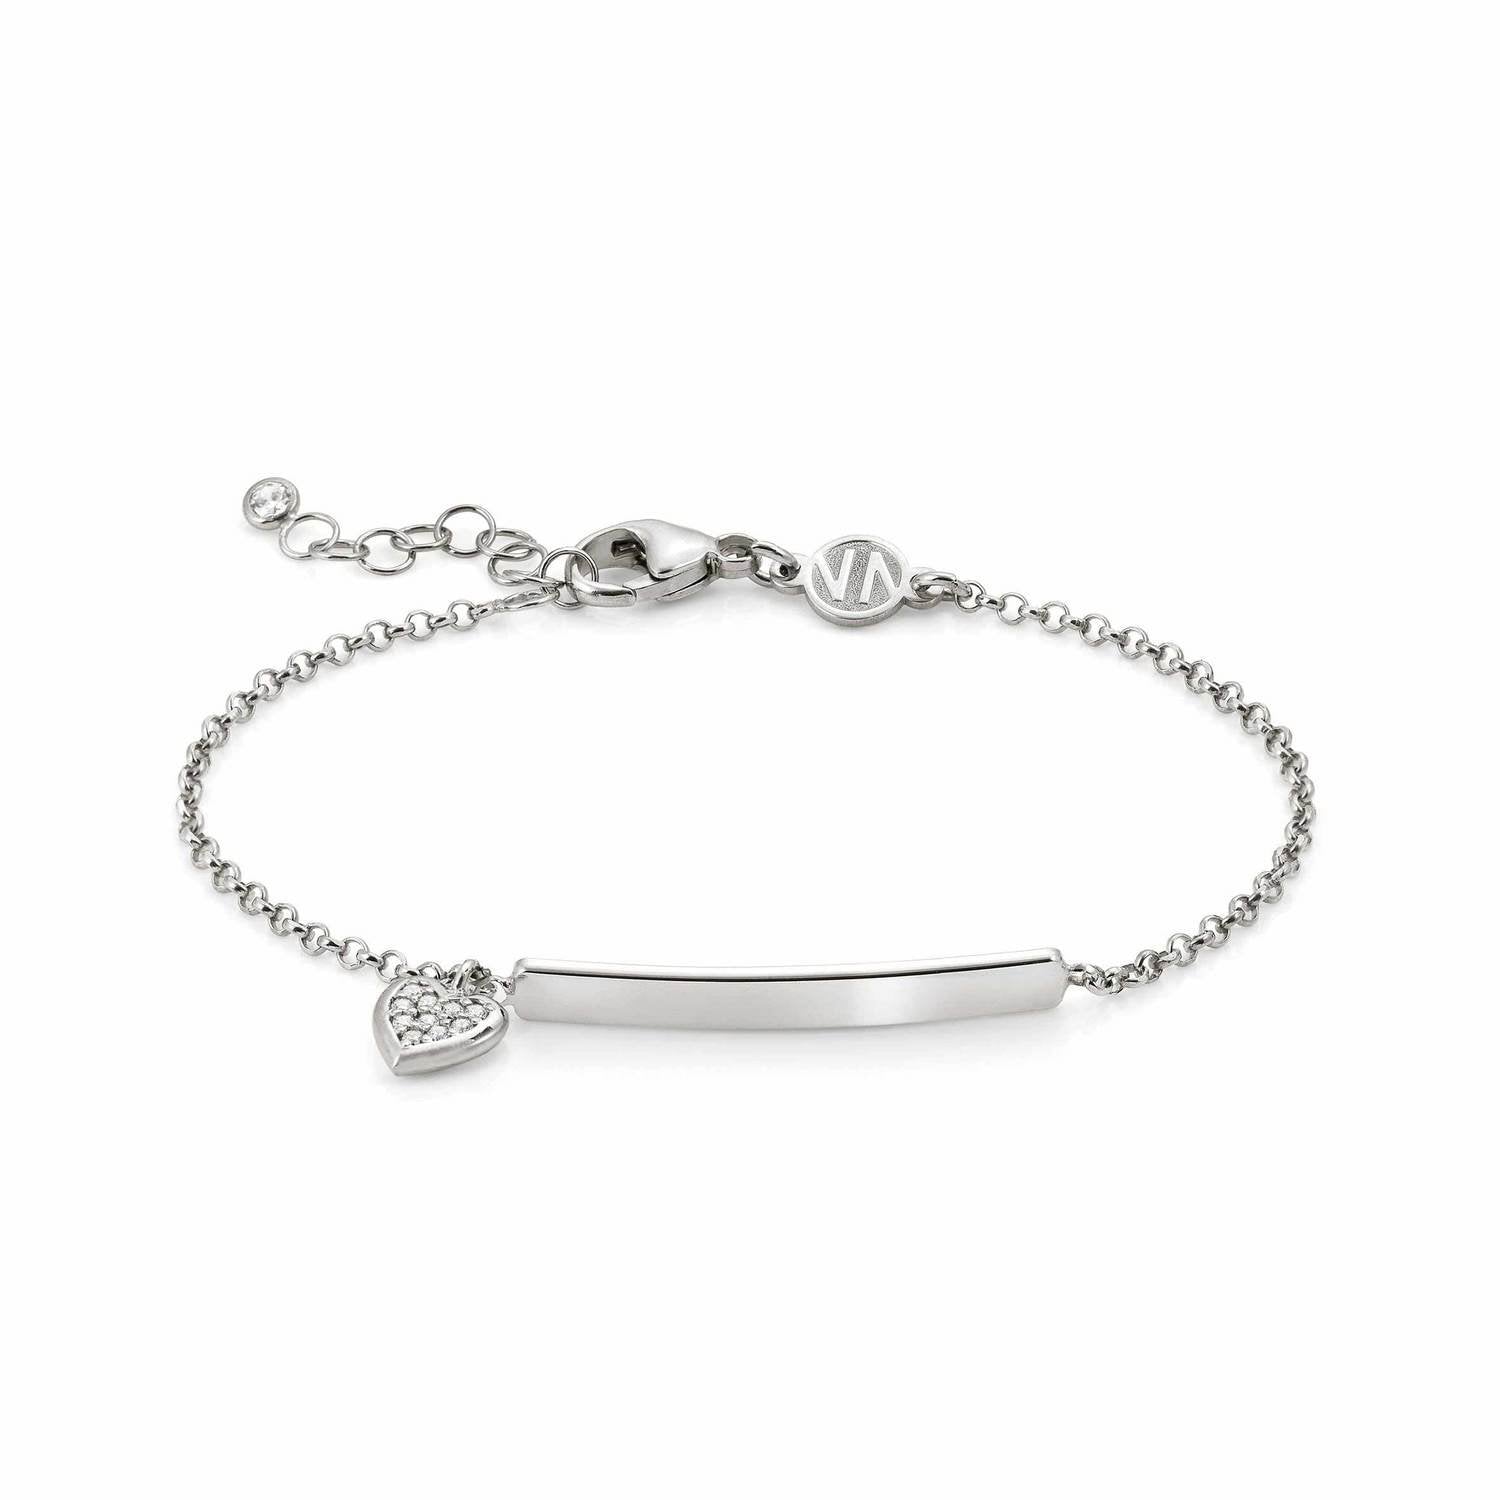 Gioie Bracelet with Sparkling Heart Pendant | Nomination Italy | Luby 